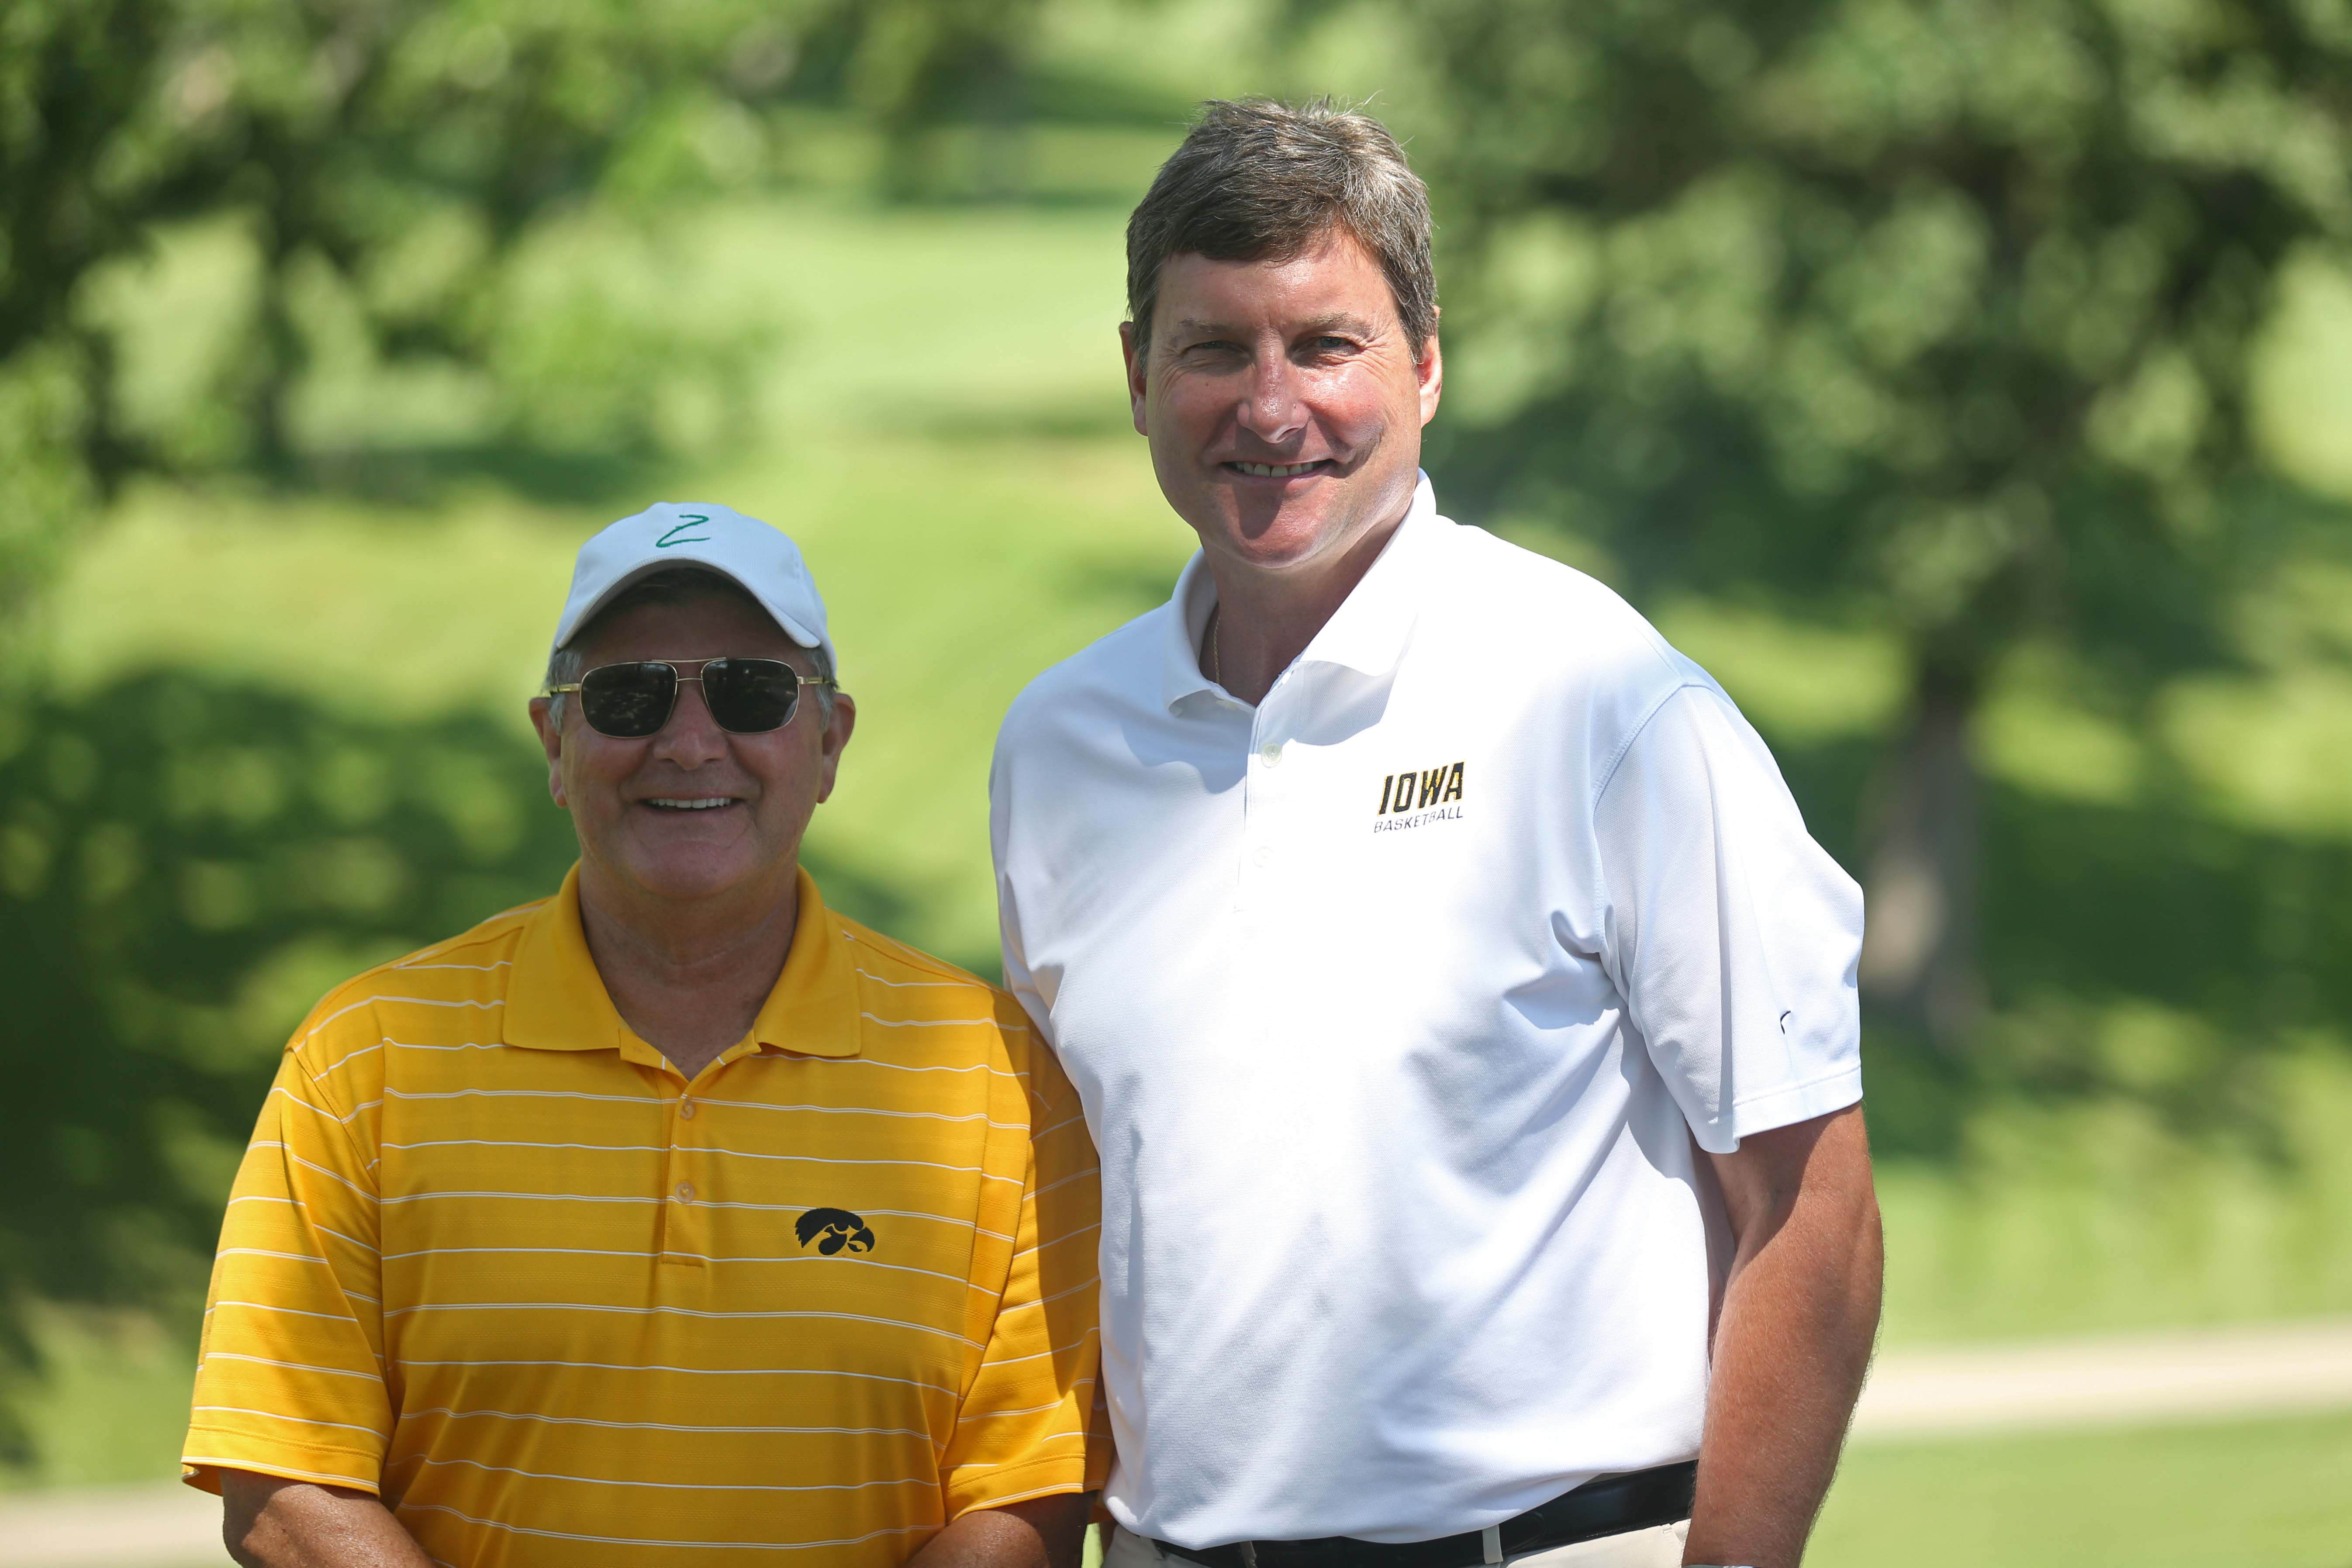 Gary Dolphin and Bobby Hansen, radio announcers for the University of Iowa basketball team pose for a photo during the annual Polk County I-Club golf fundraiser at Wakonda Club in Des Moines on Monday, June 13, 2015.